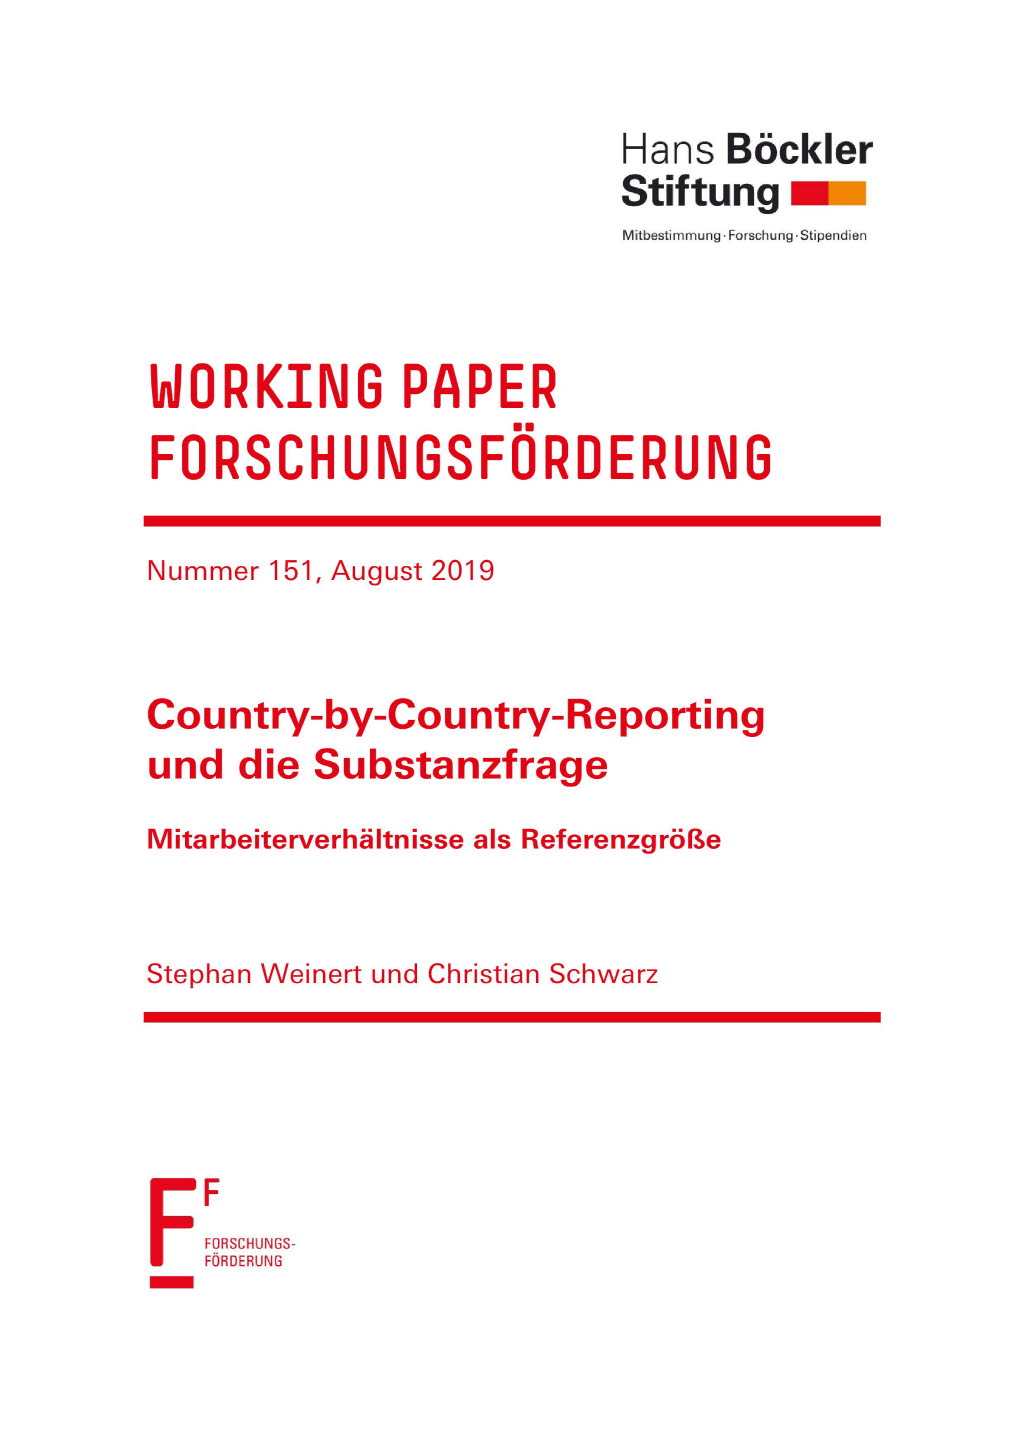 Country-by-Country-Reporting und die Substanzfrage